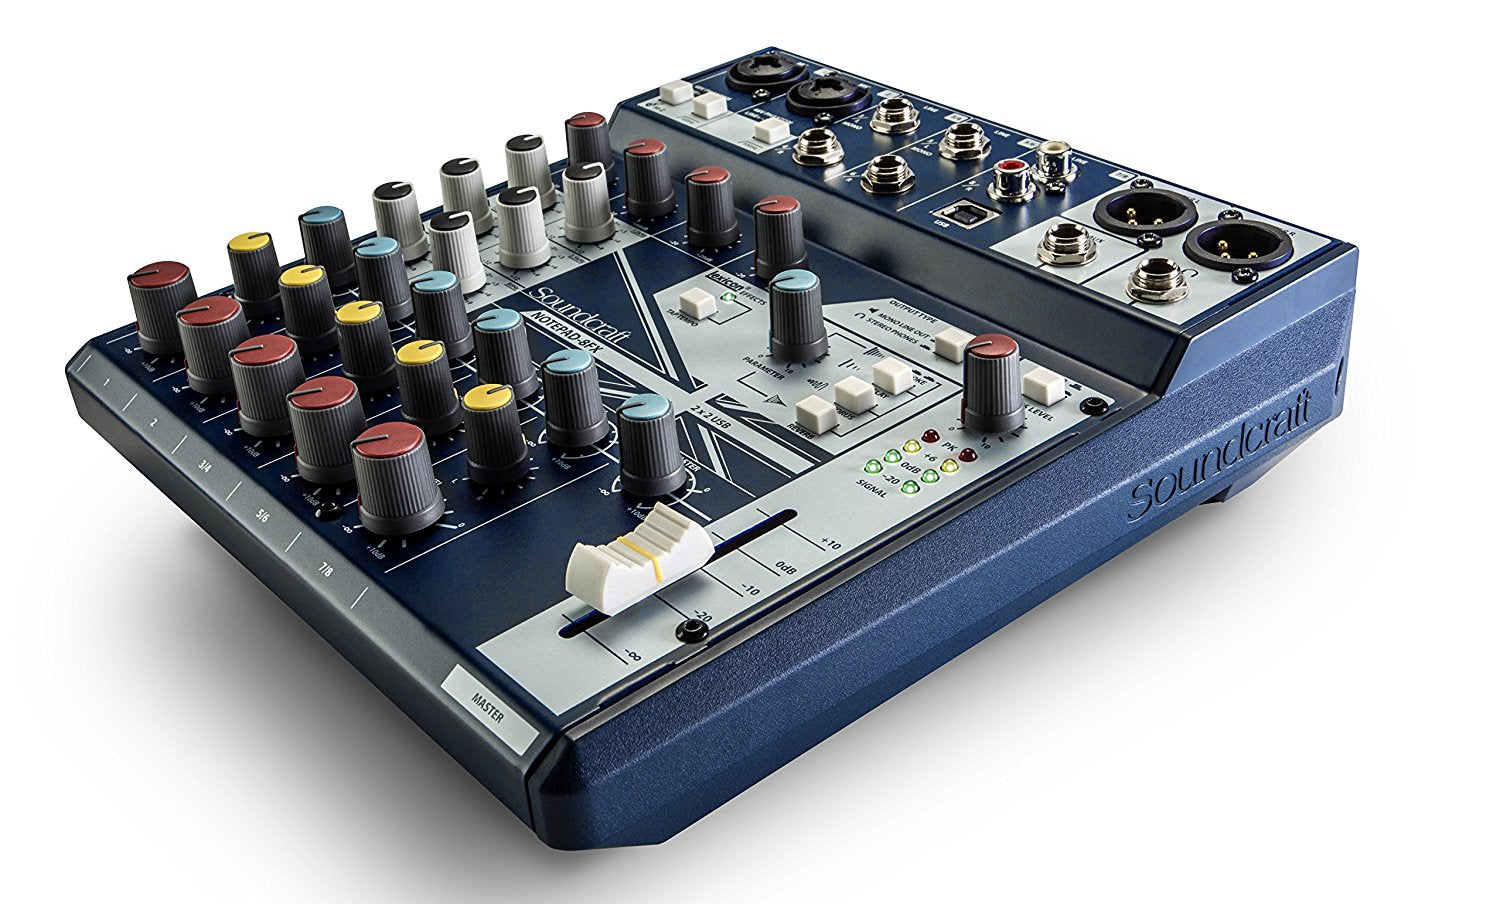 SOUNDCRAFT SMALL-FORMAT 8-CHANNEL ANALOG MIXING CONSOLE WITH USB I/O AND LEXICON EFFECTS, SOUNDCRAFT, AUDIO MIXER, soundcraft-small-format-8-channel-analog-mixing-console-with-usb-i-o-and-lexicon-effects, ZOSO MUSIC SDN BHD